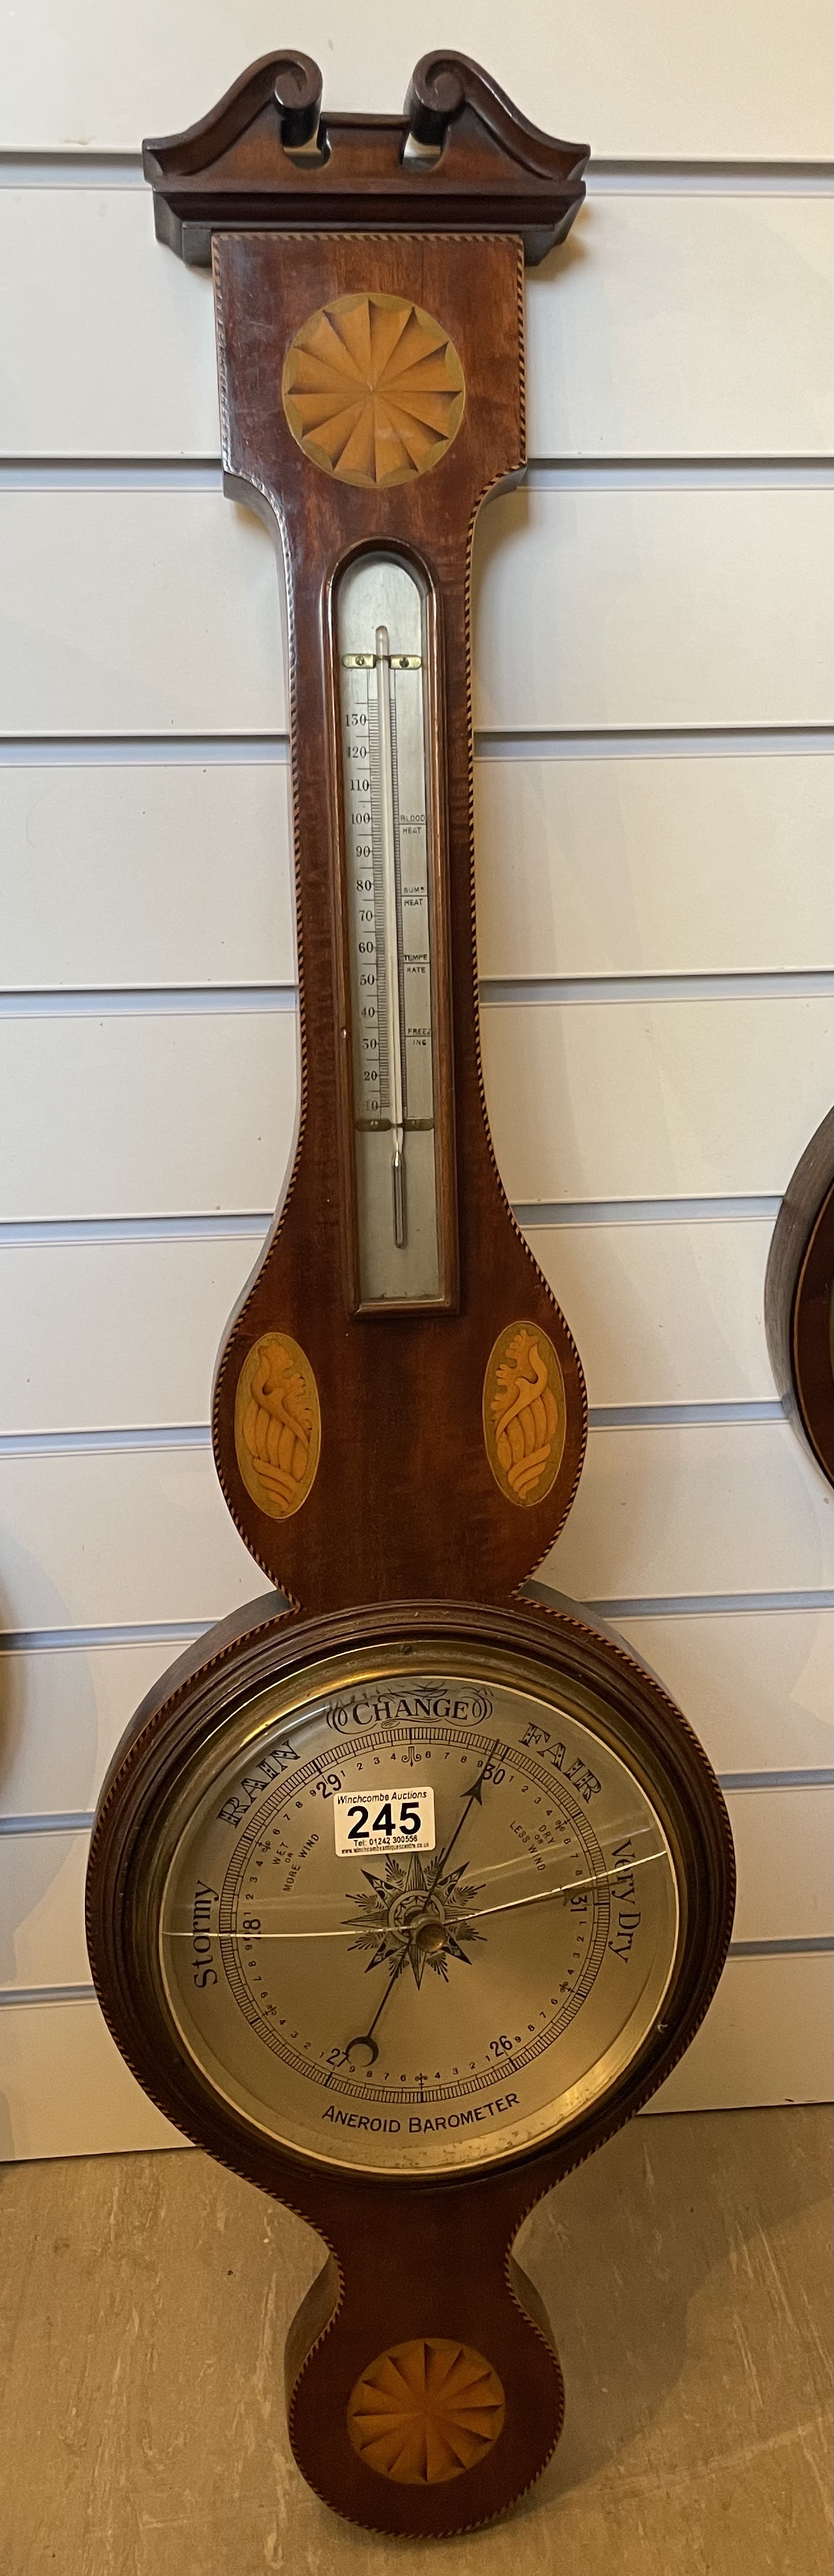 Inlaid Wheel Barometer With Shell Designs